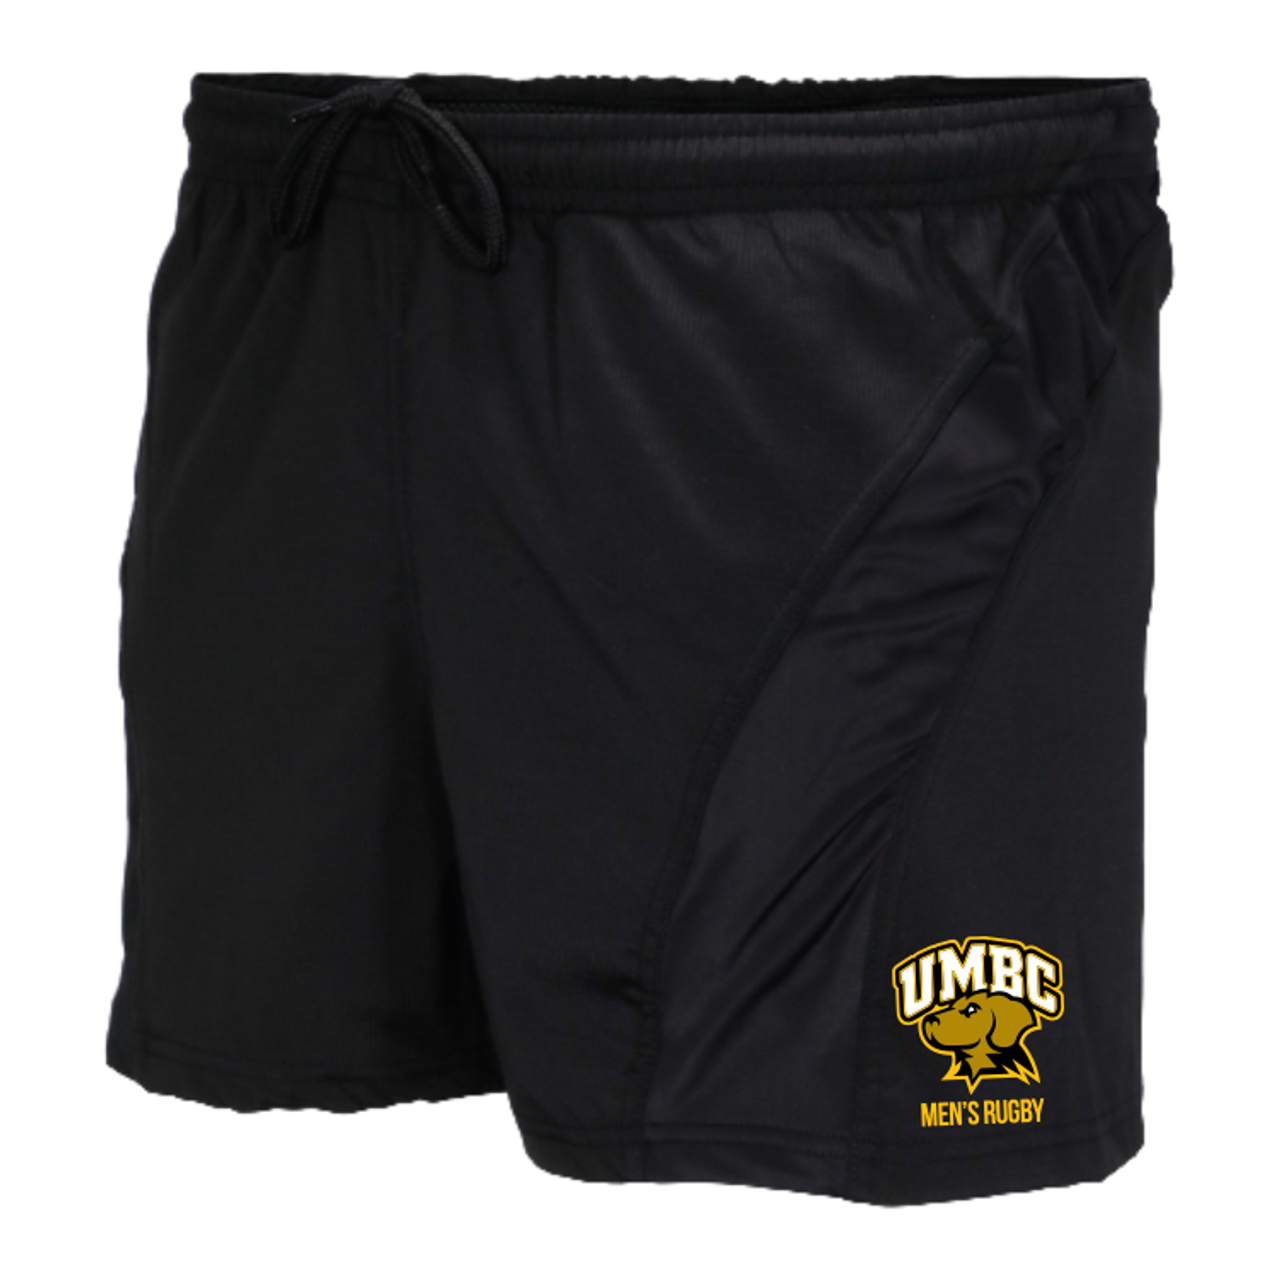 UMBC Men's Non-Pocketed Performance Rugby Shorts